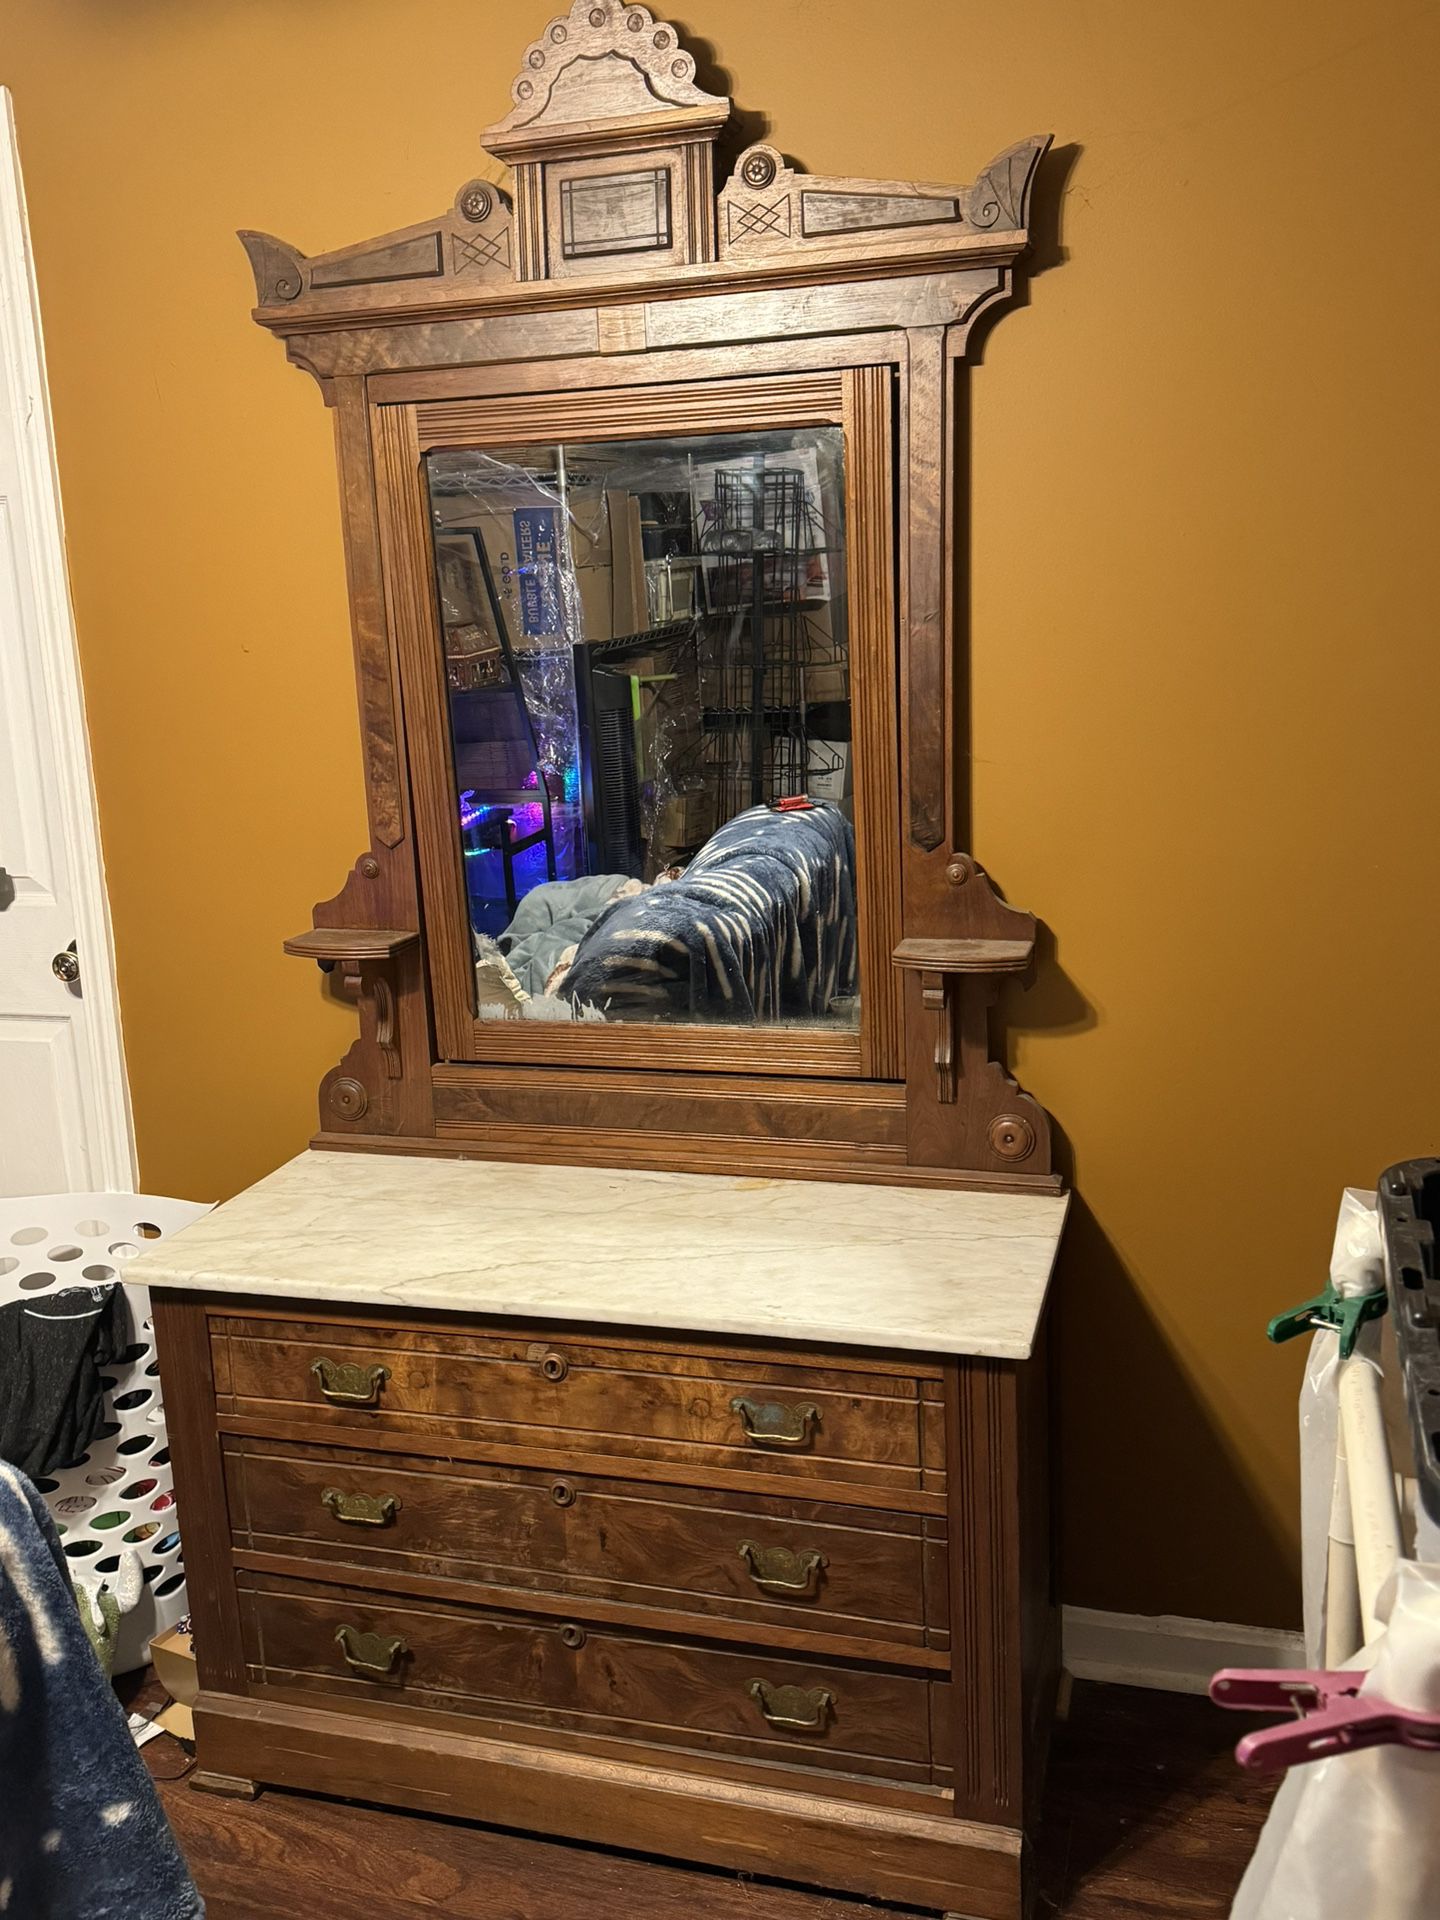 1800’s Antique Marble Top Dresser With Mirror